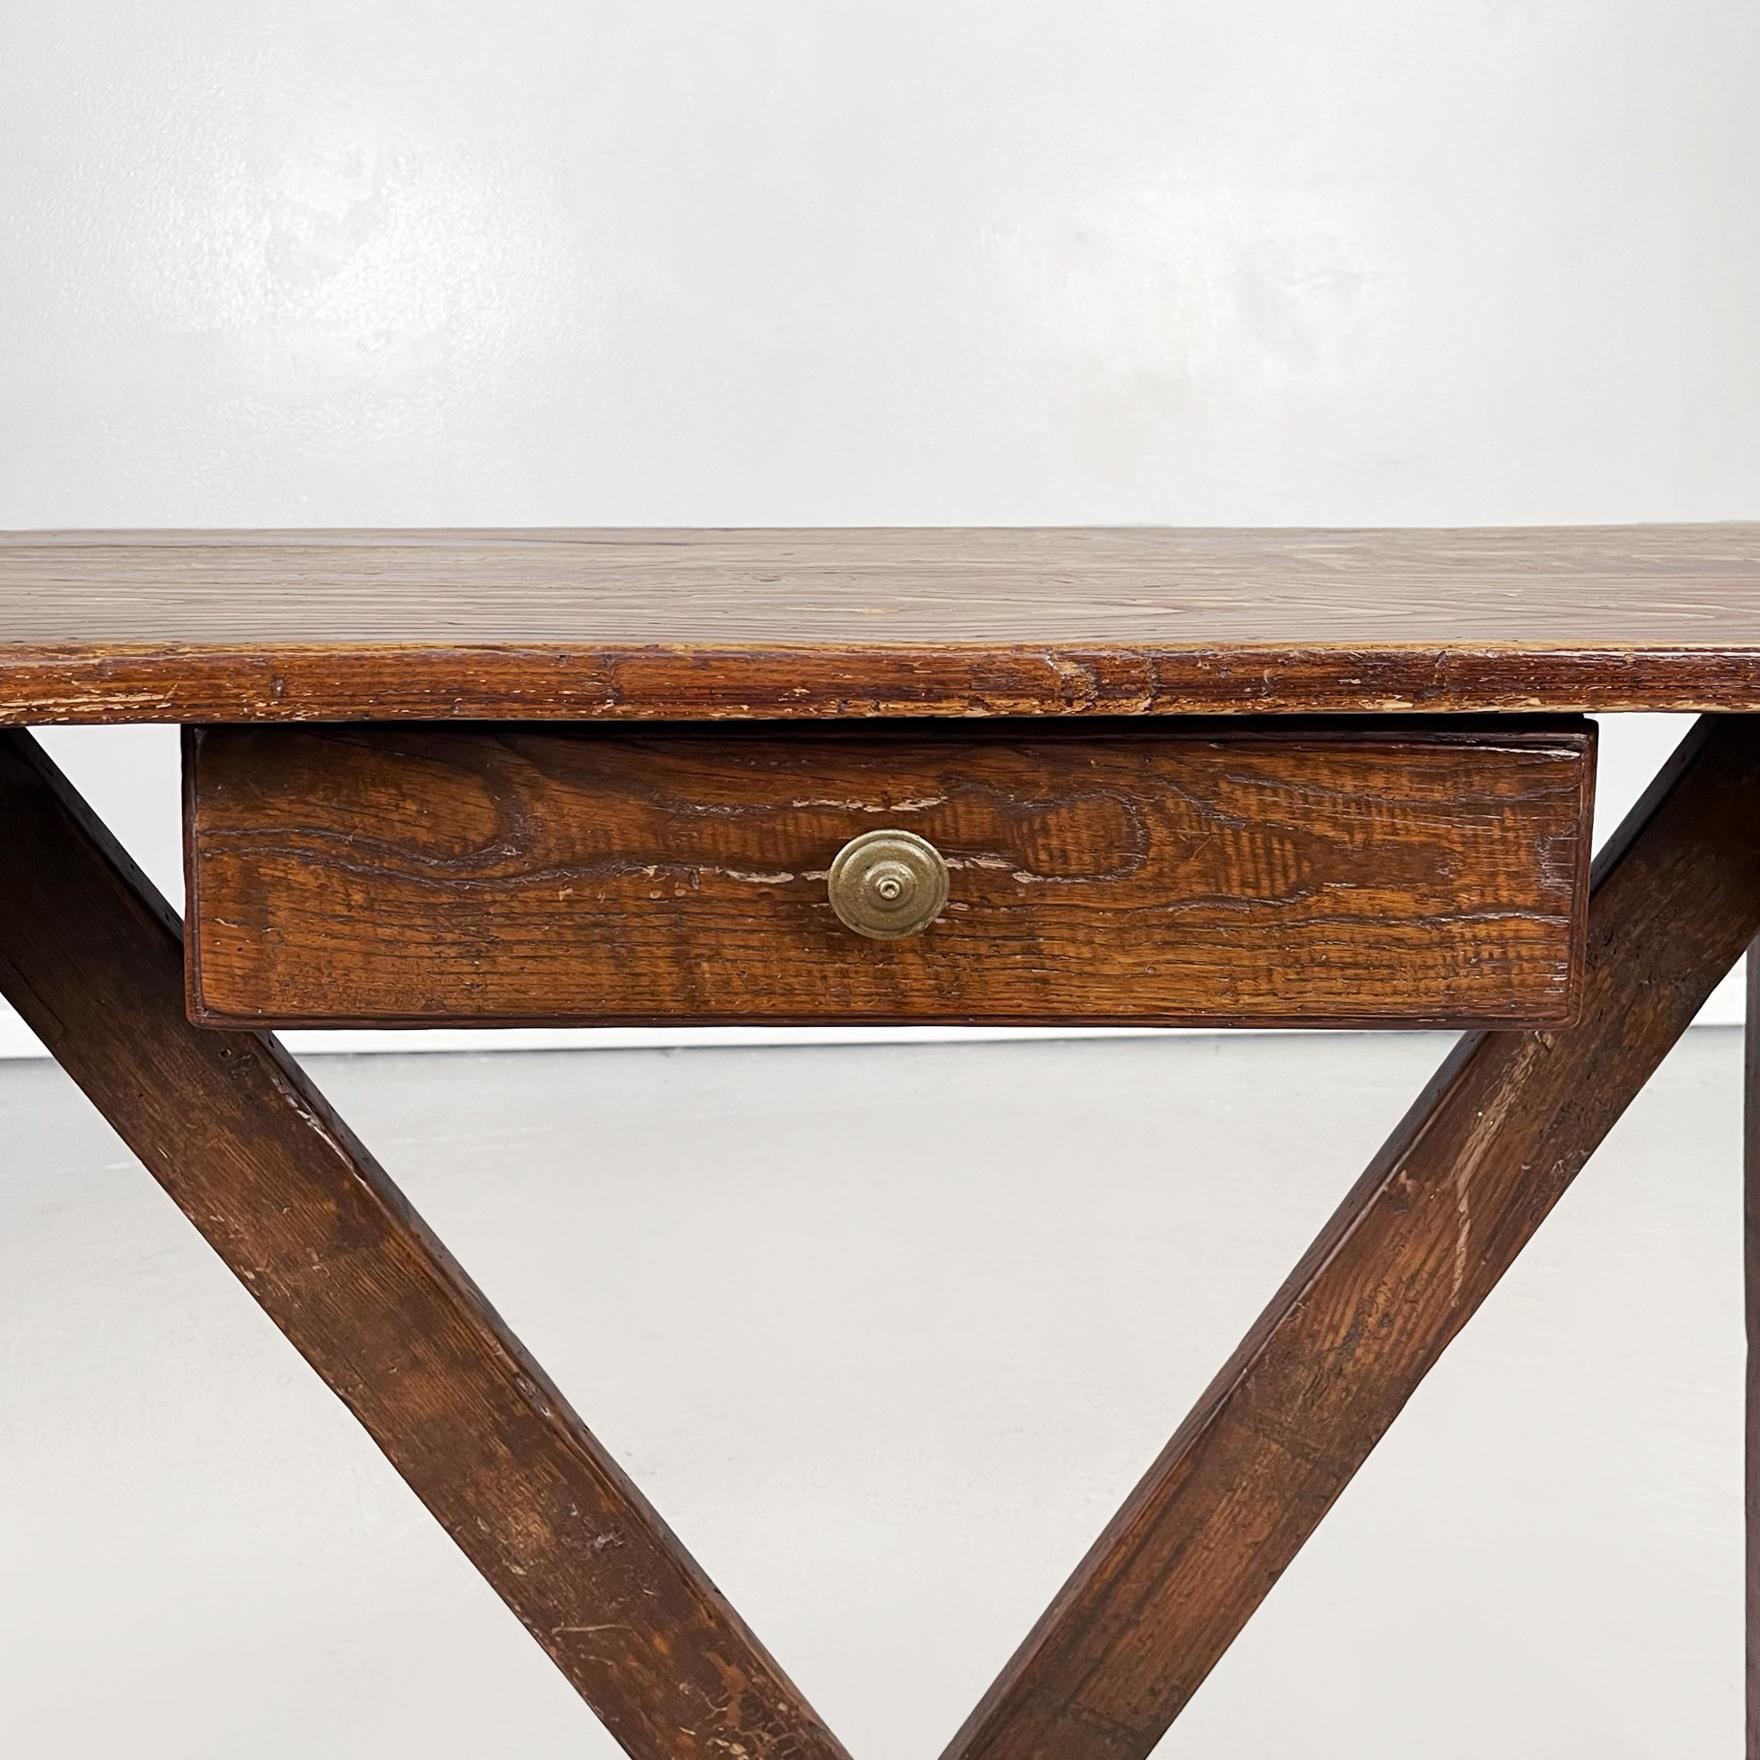 Italian Antique Wooden Table Fratino with a Drawer, 1900s For Sale 6